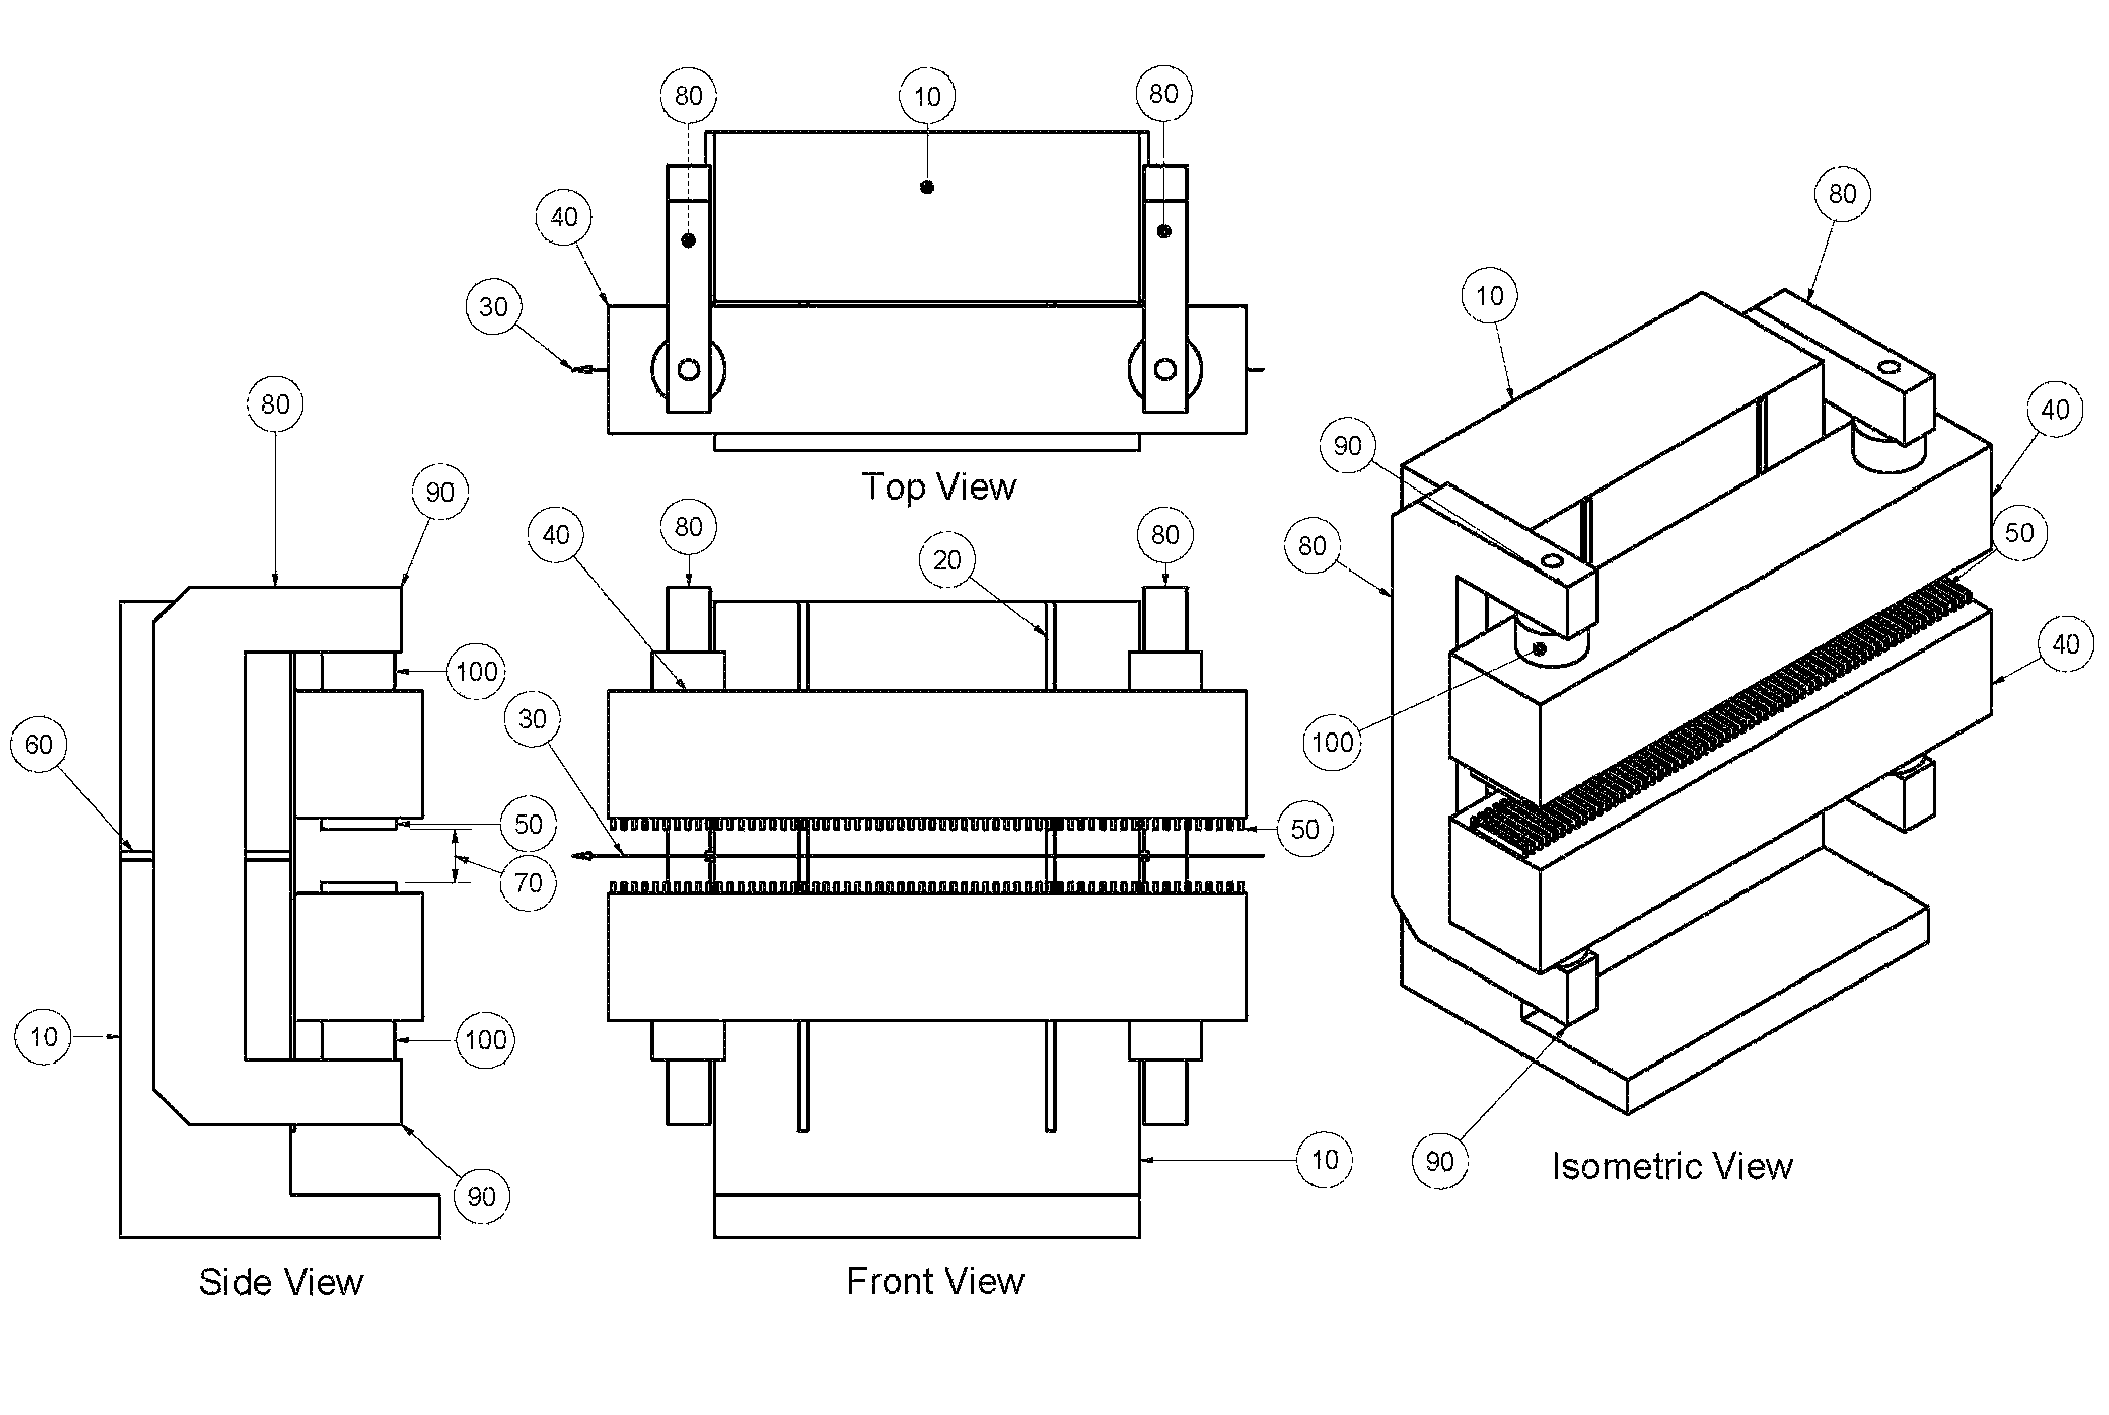 Support structures for planar insertion devices